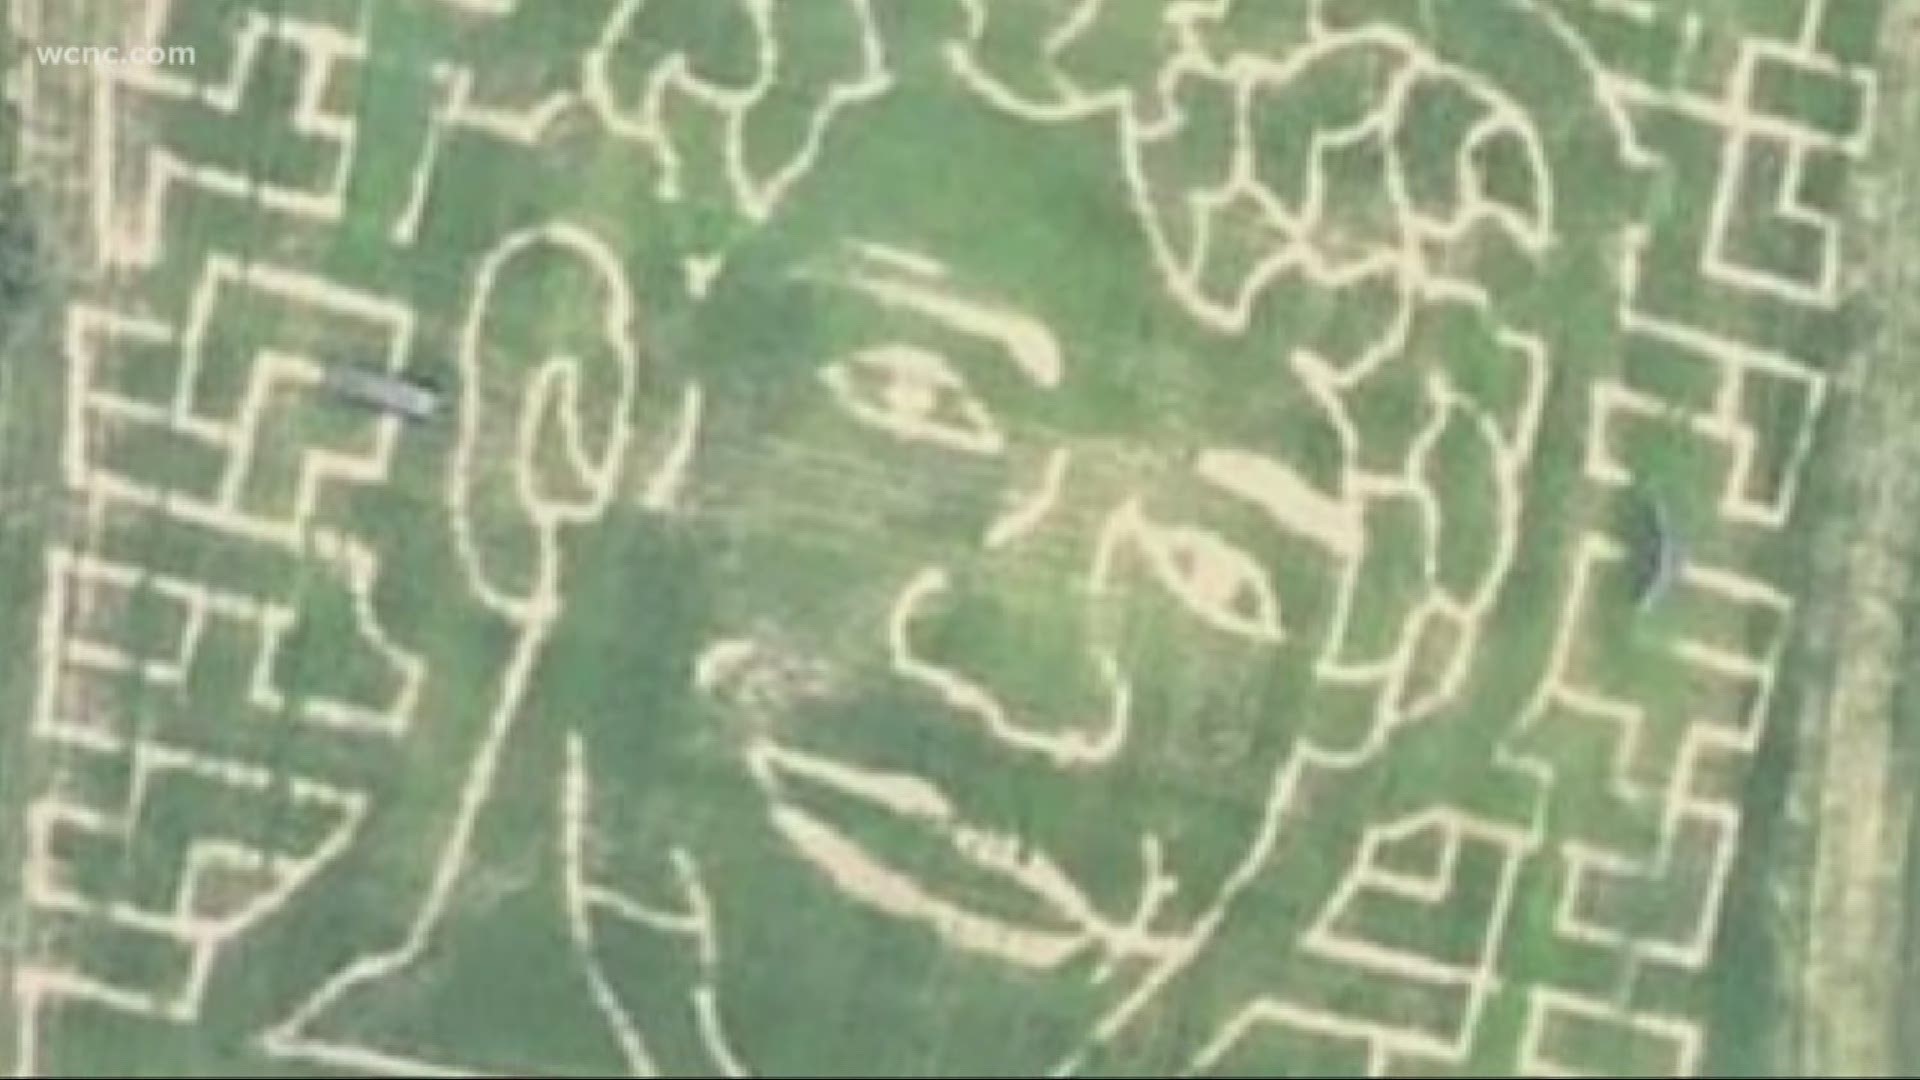 This maze is particularly special because from the air it looks like Riley Howell, the UNCC student dubbed a hero after sacrificing his life to stop a gunman.